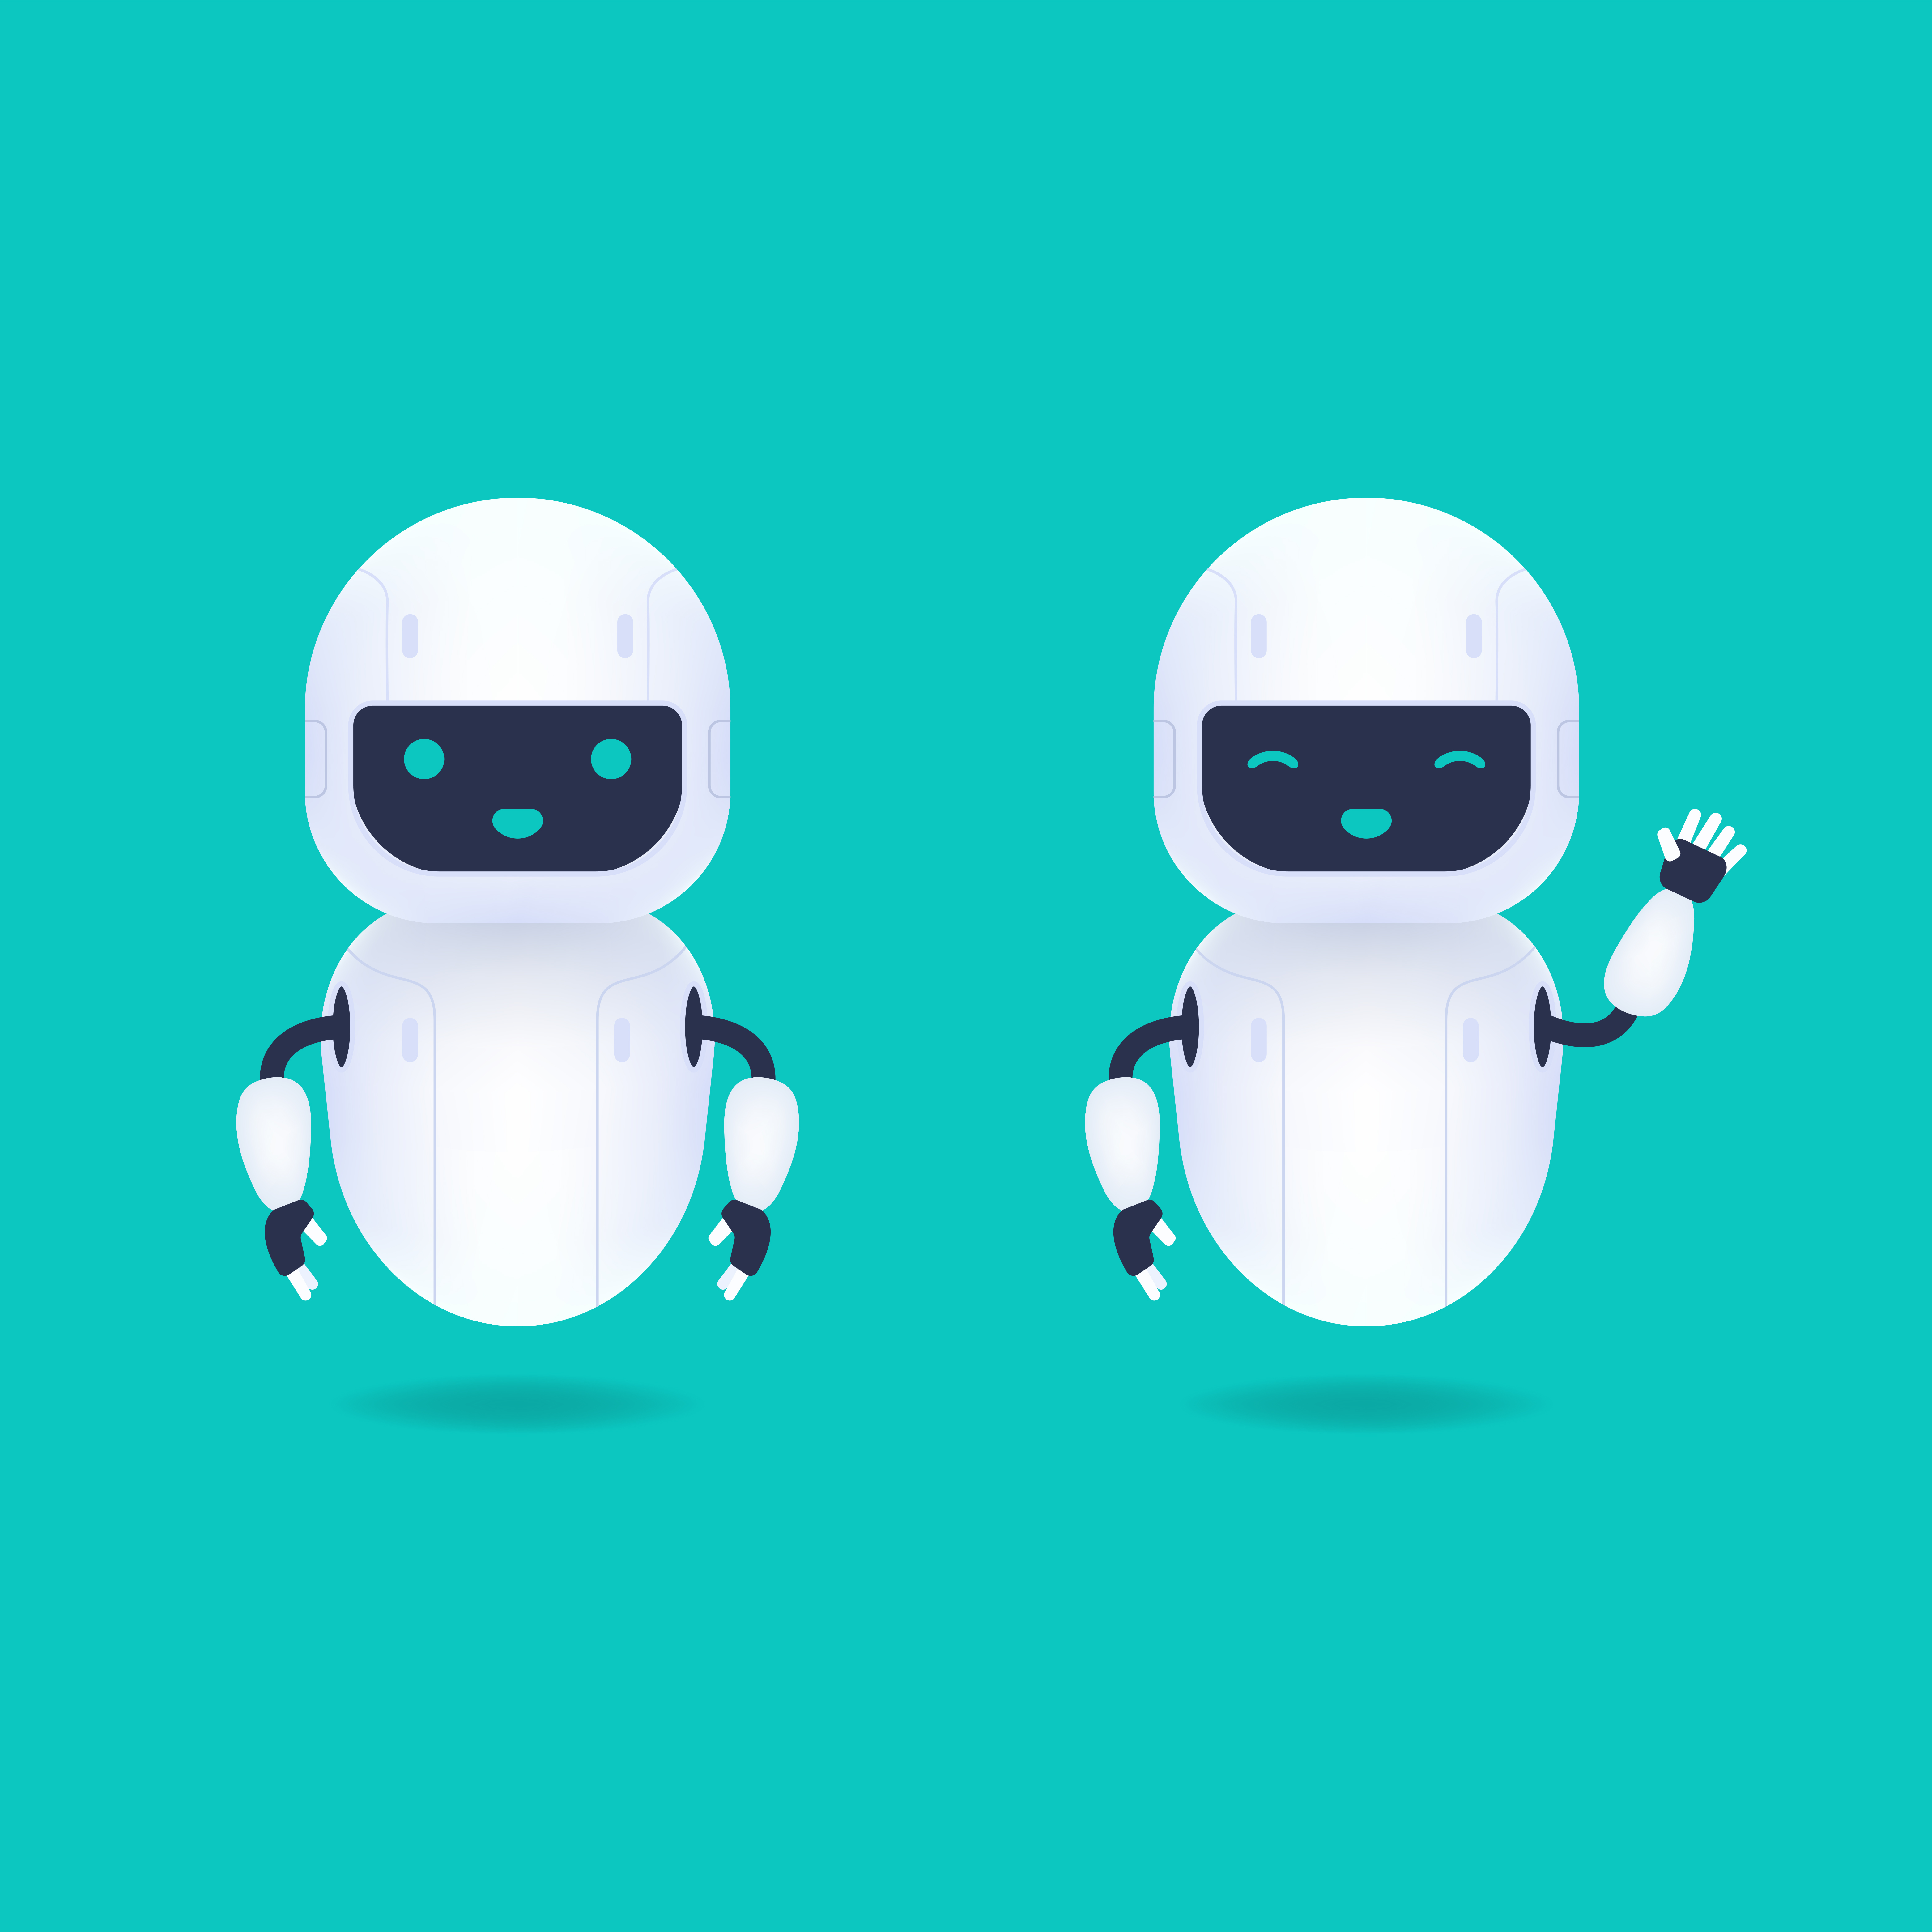 White friendly android robot characters 685991 - Download Free Vectors